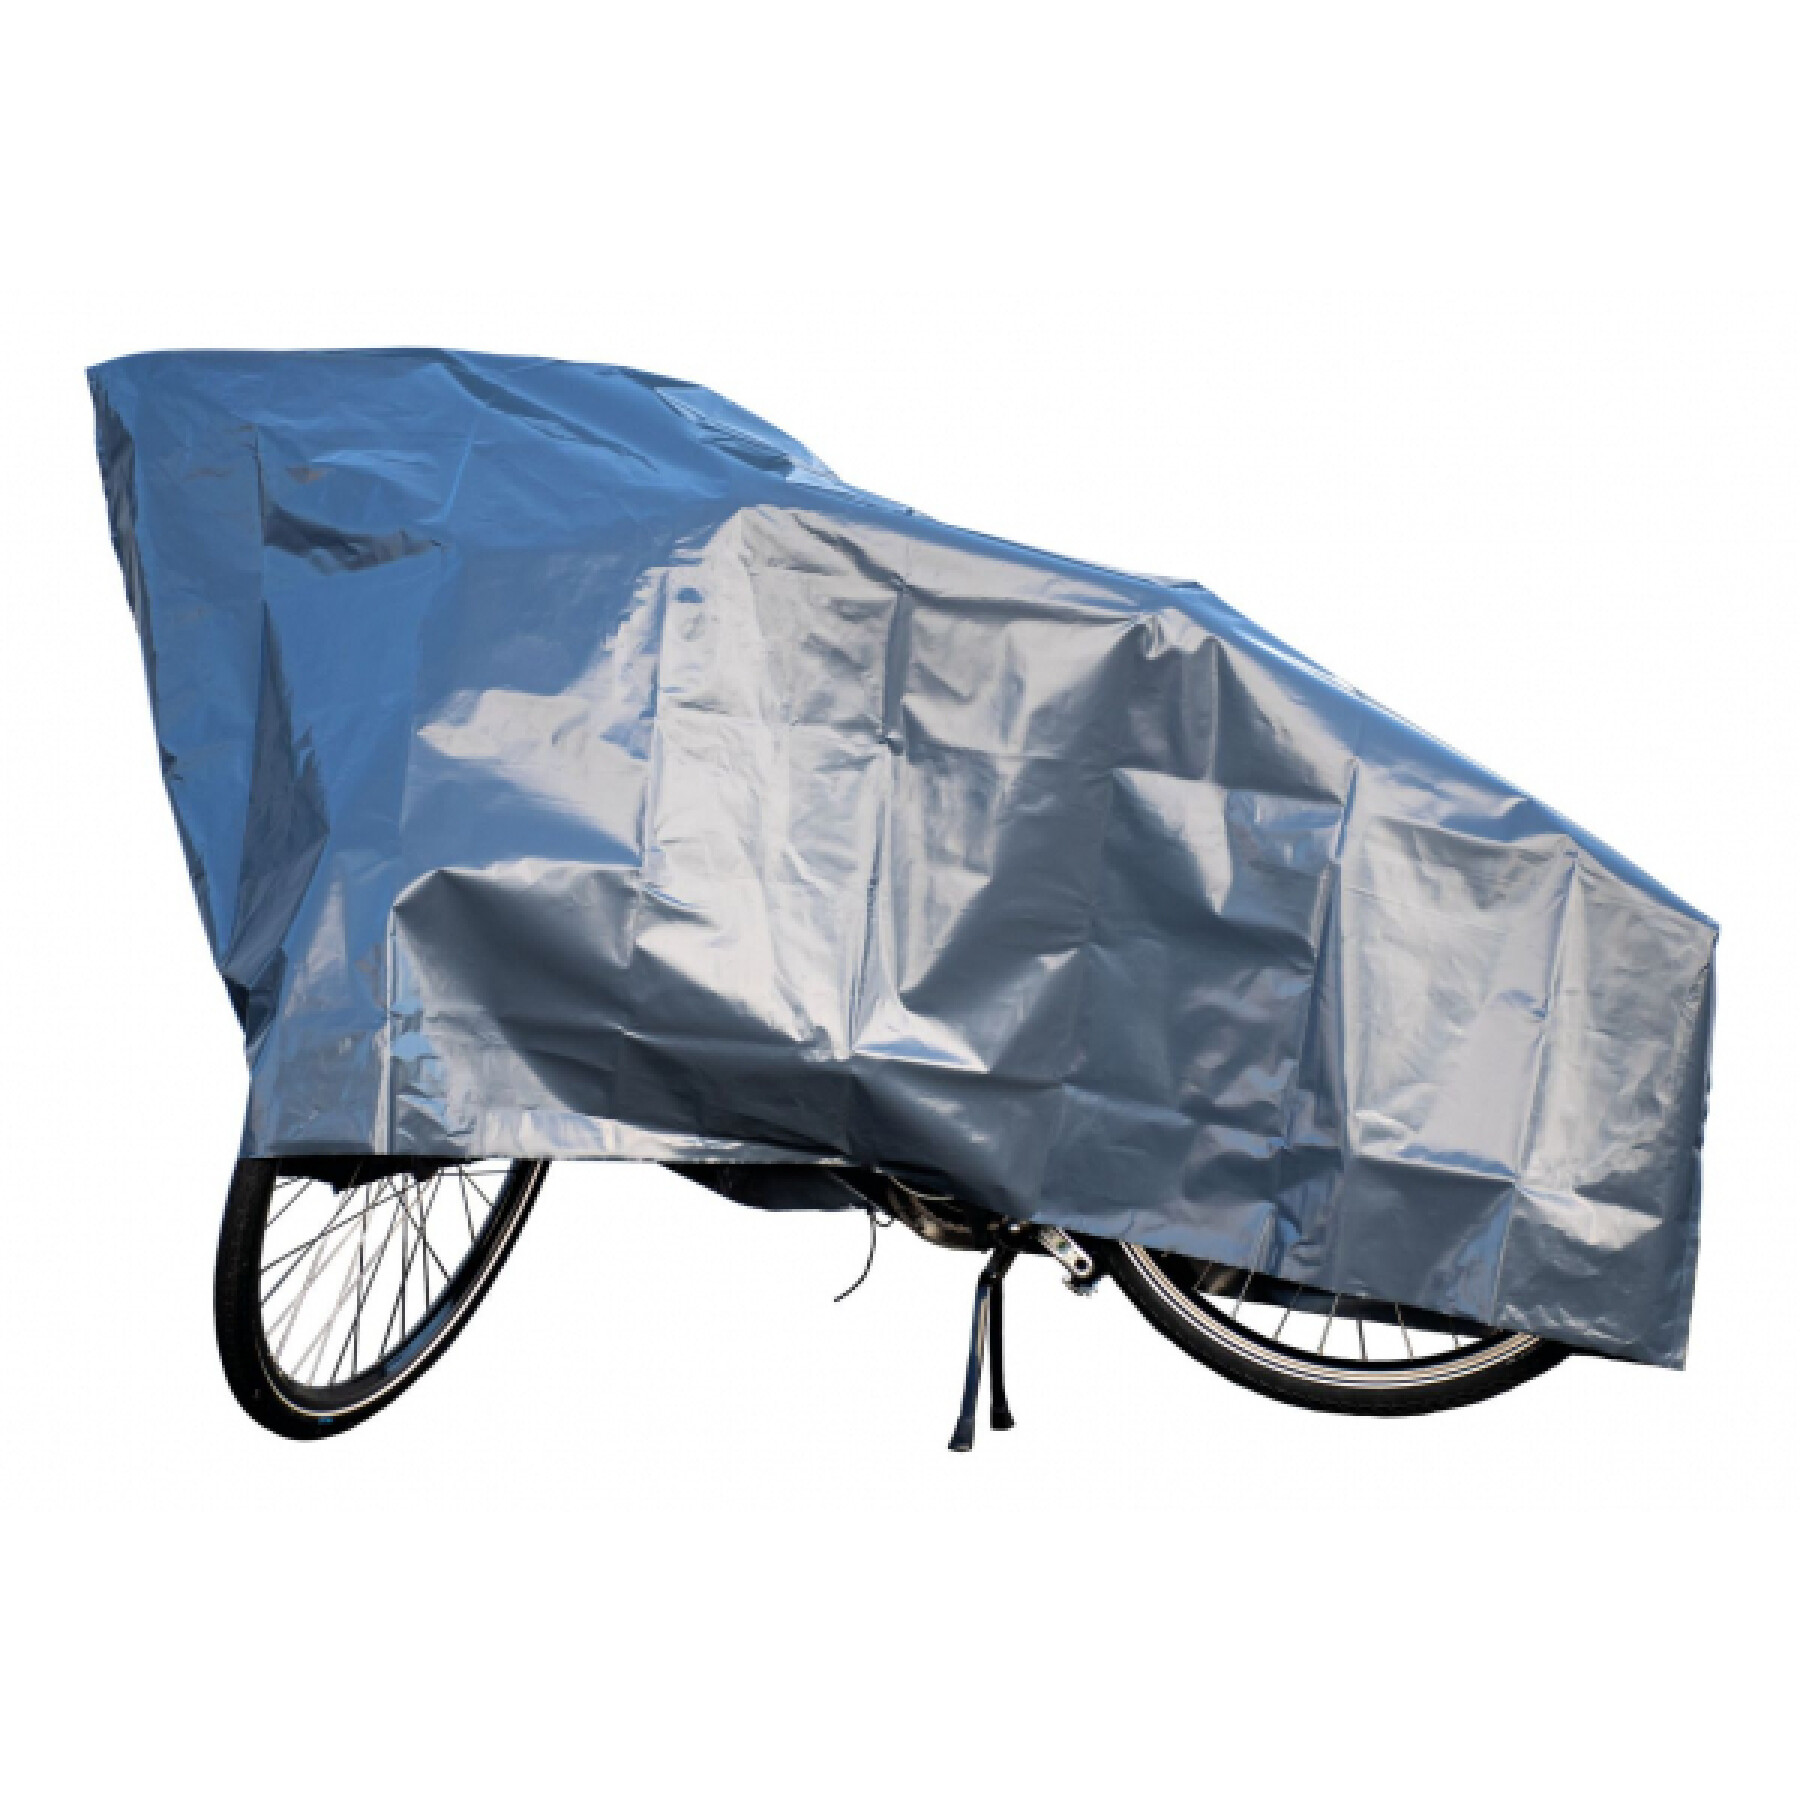 Folding bike cover with straps XLC Vg-g01